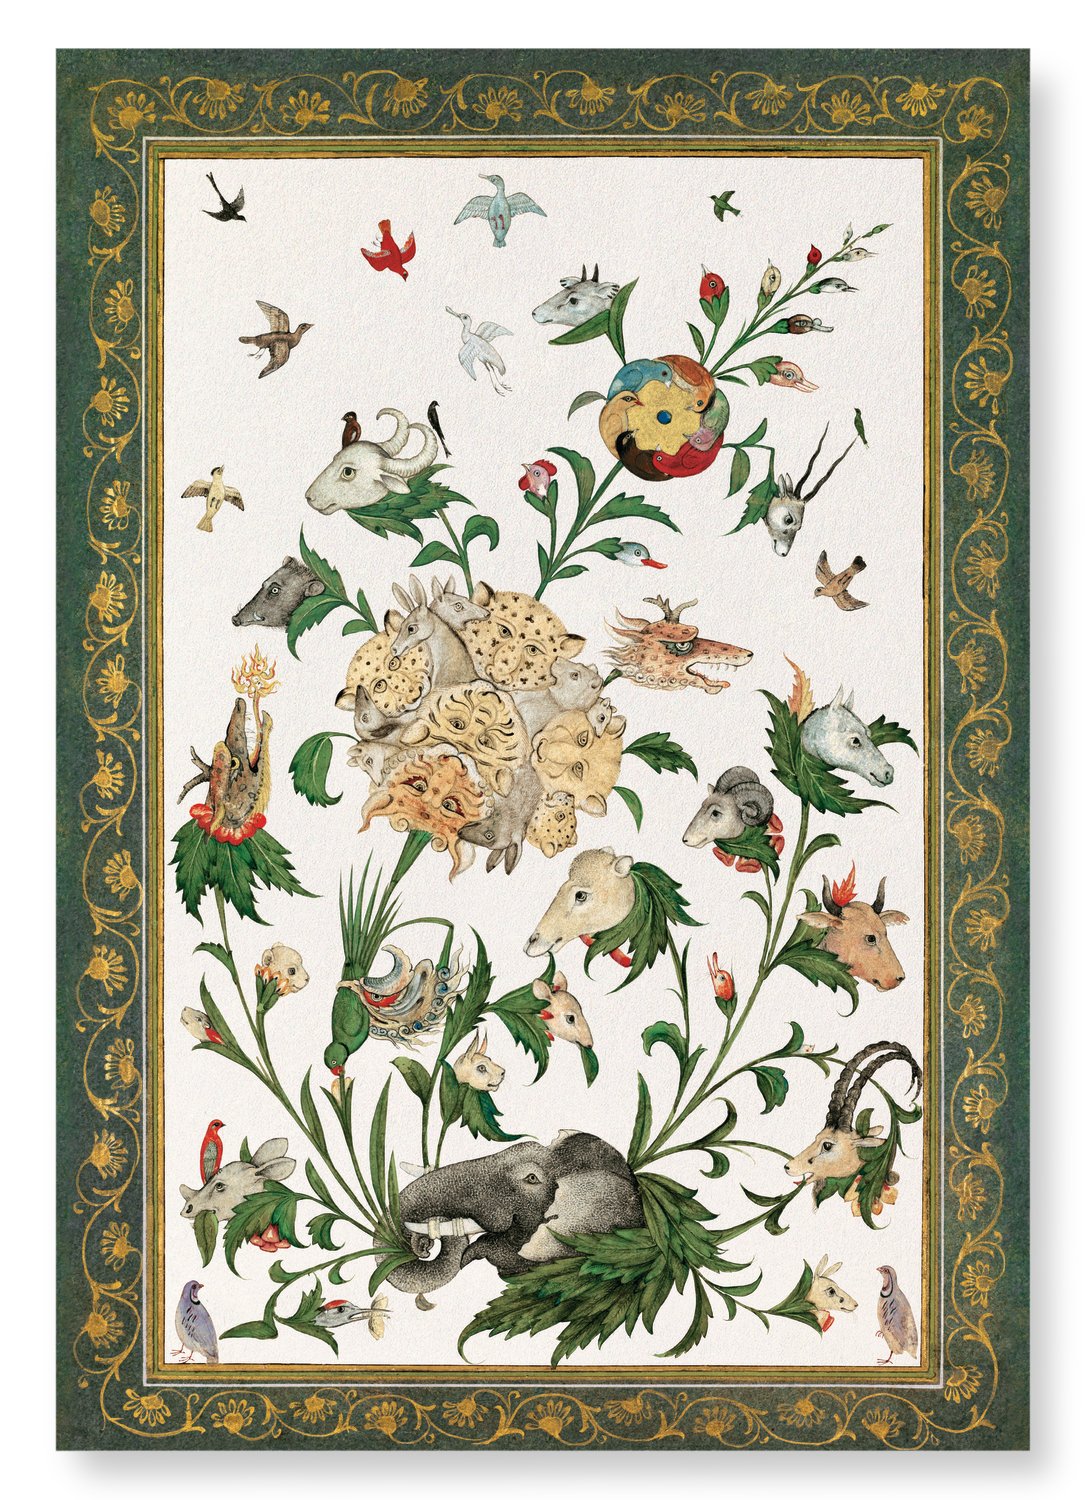 FLORAL FANTASY: ANIMALS & BIRDS (EARLY 17TH C.): Painting Art Print